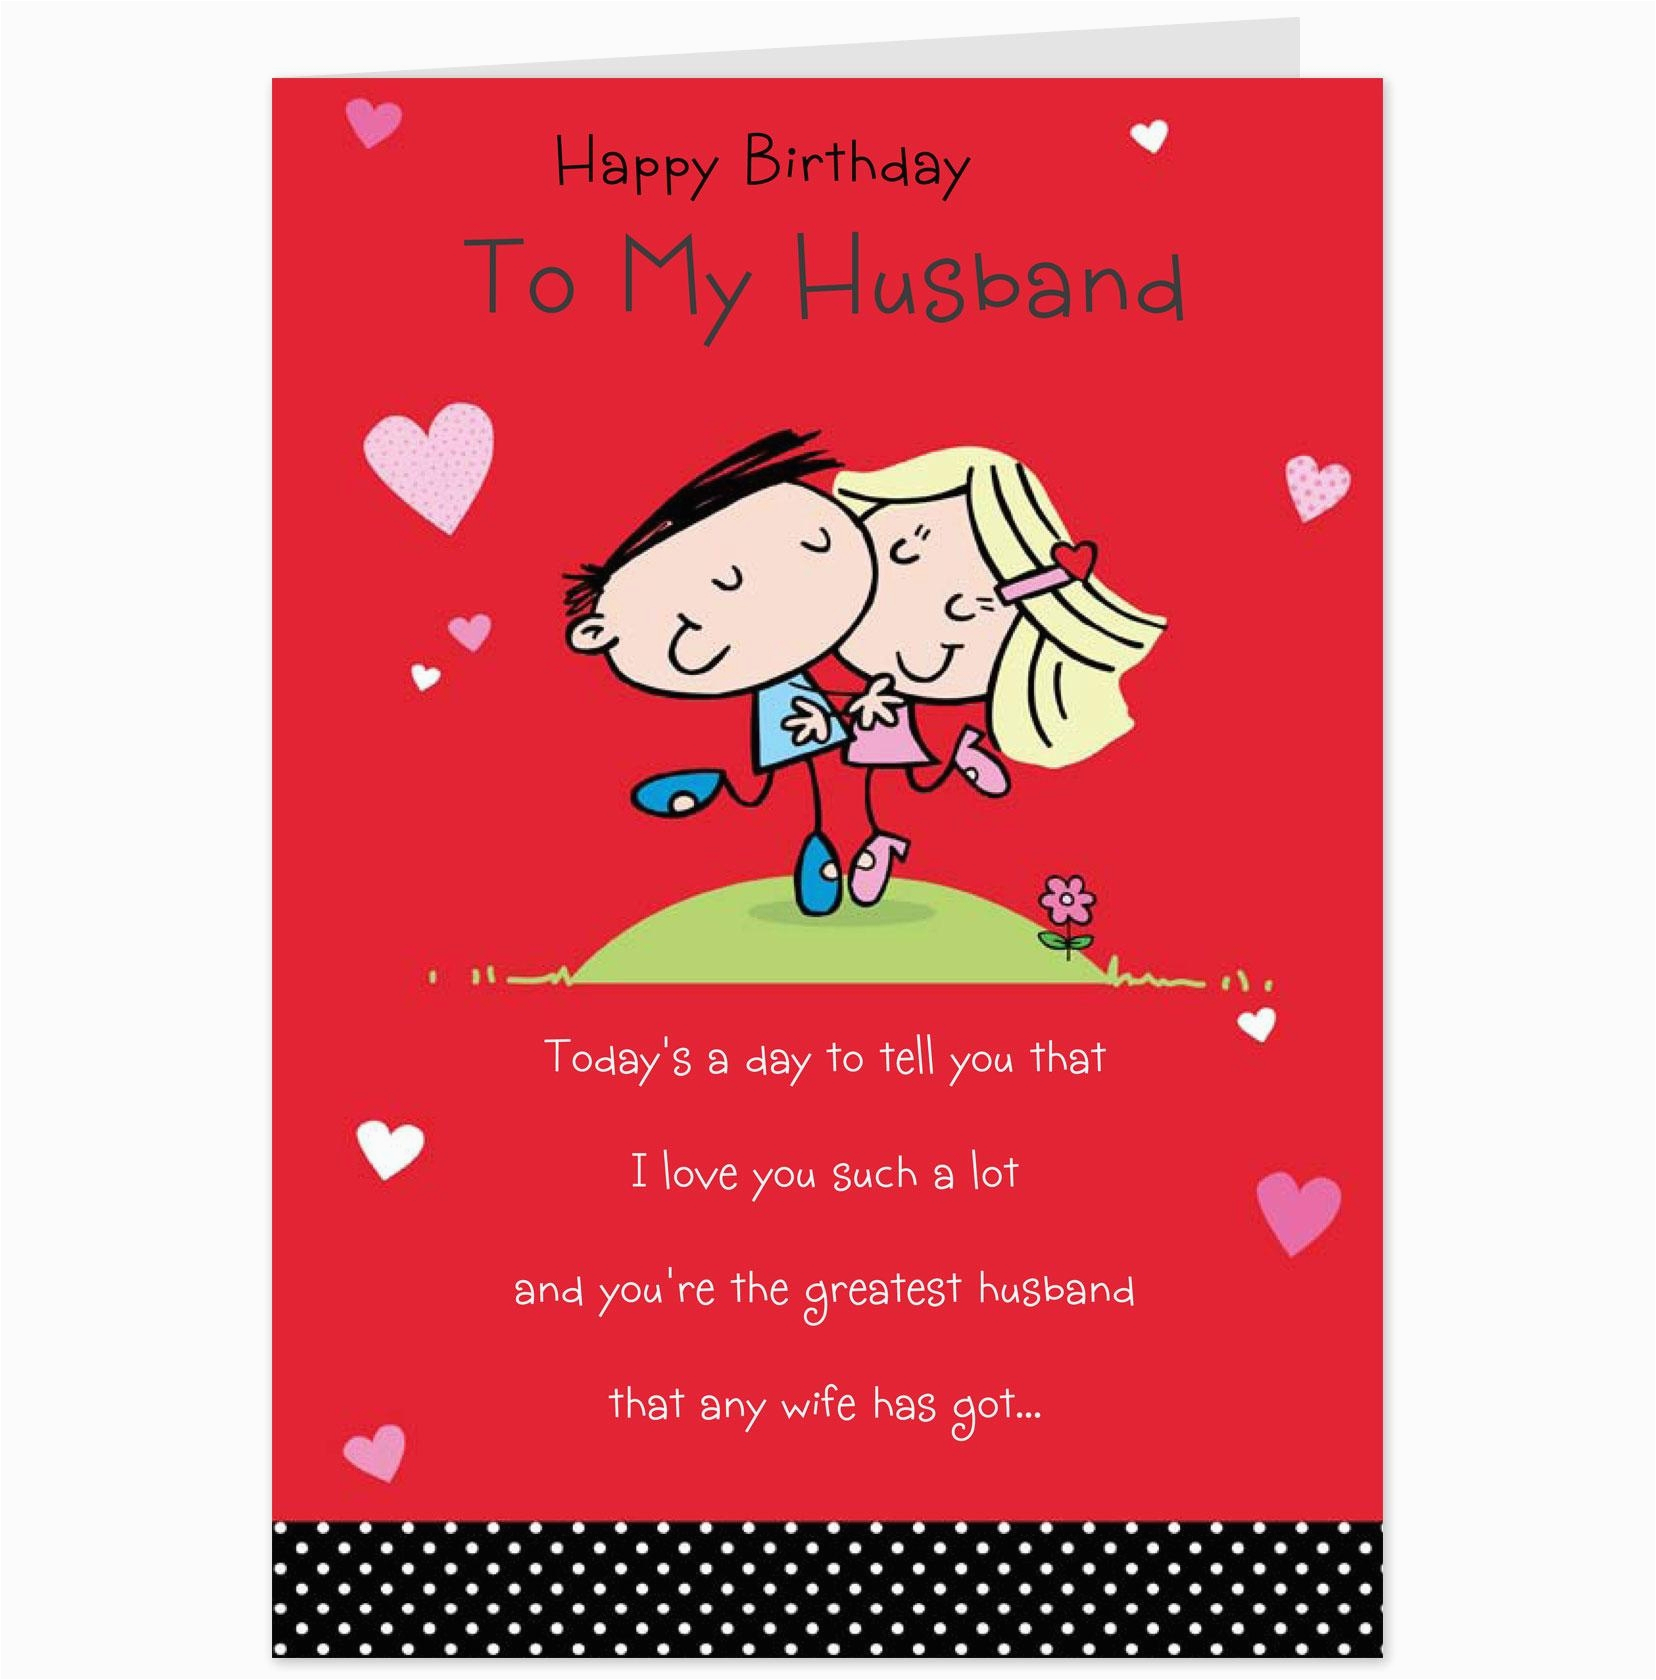 Happy Birthday Husband Funny Cards The Best And Most Comprehensive